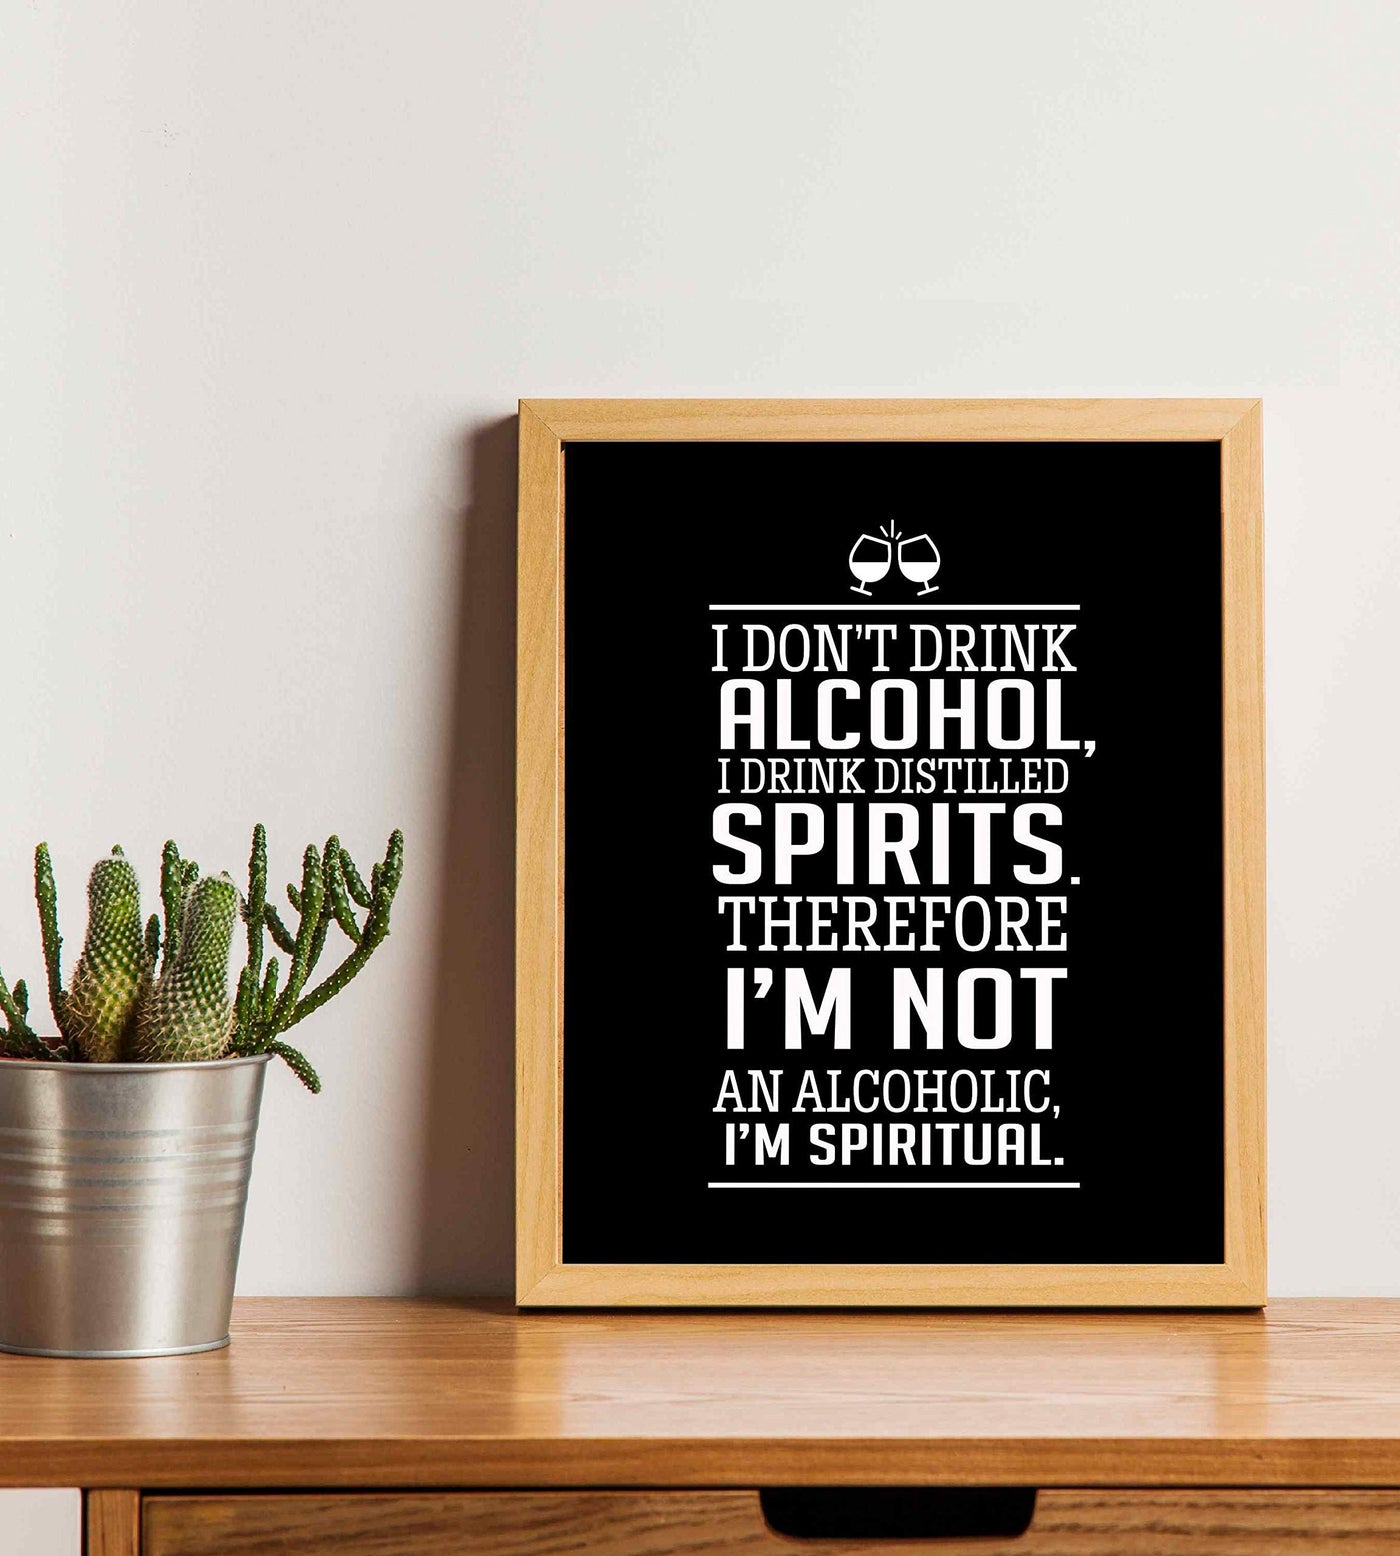 I Drink Distilled Spirits Therefore I'm Spiritual- Funny Wall Sign-8 x 10" Modern Art Print-Ready to Frame. Humorous Home-Kitchen-Bar-Cave Decor. Fun Novelty Gift for Alcohol-Beer-Wine Drinkers!